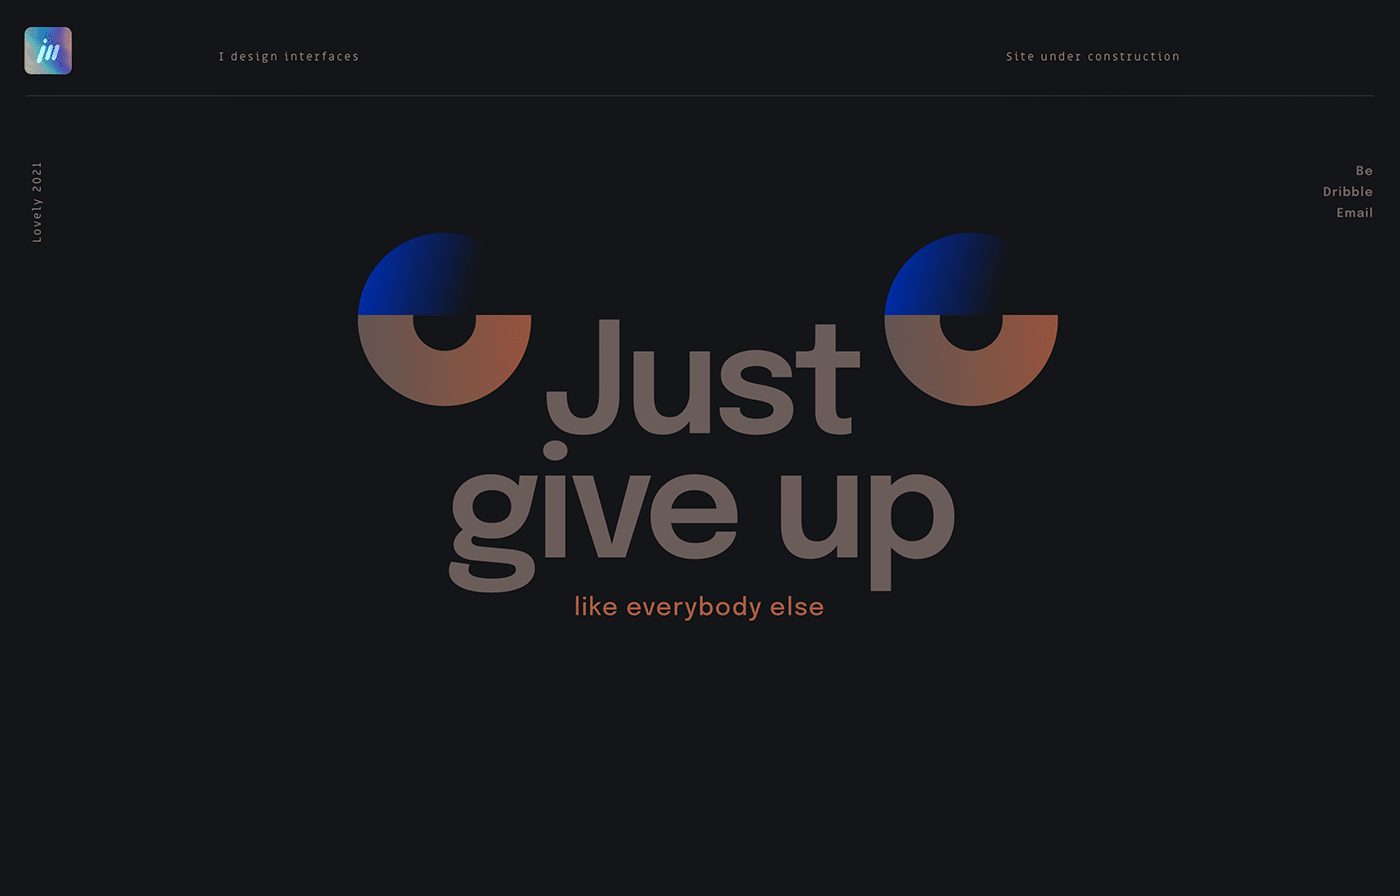 Just give up, live everybody else